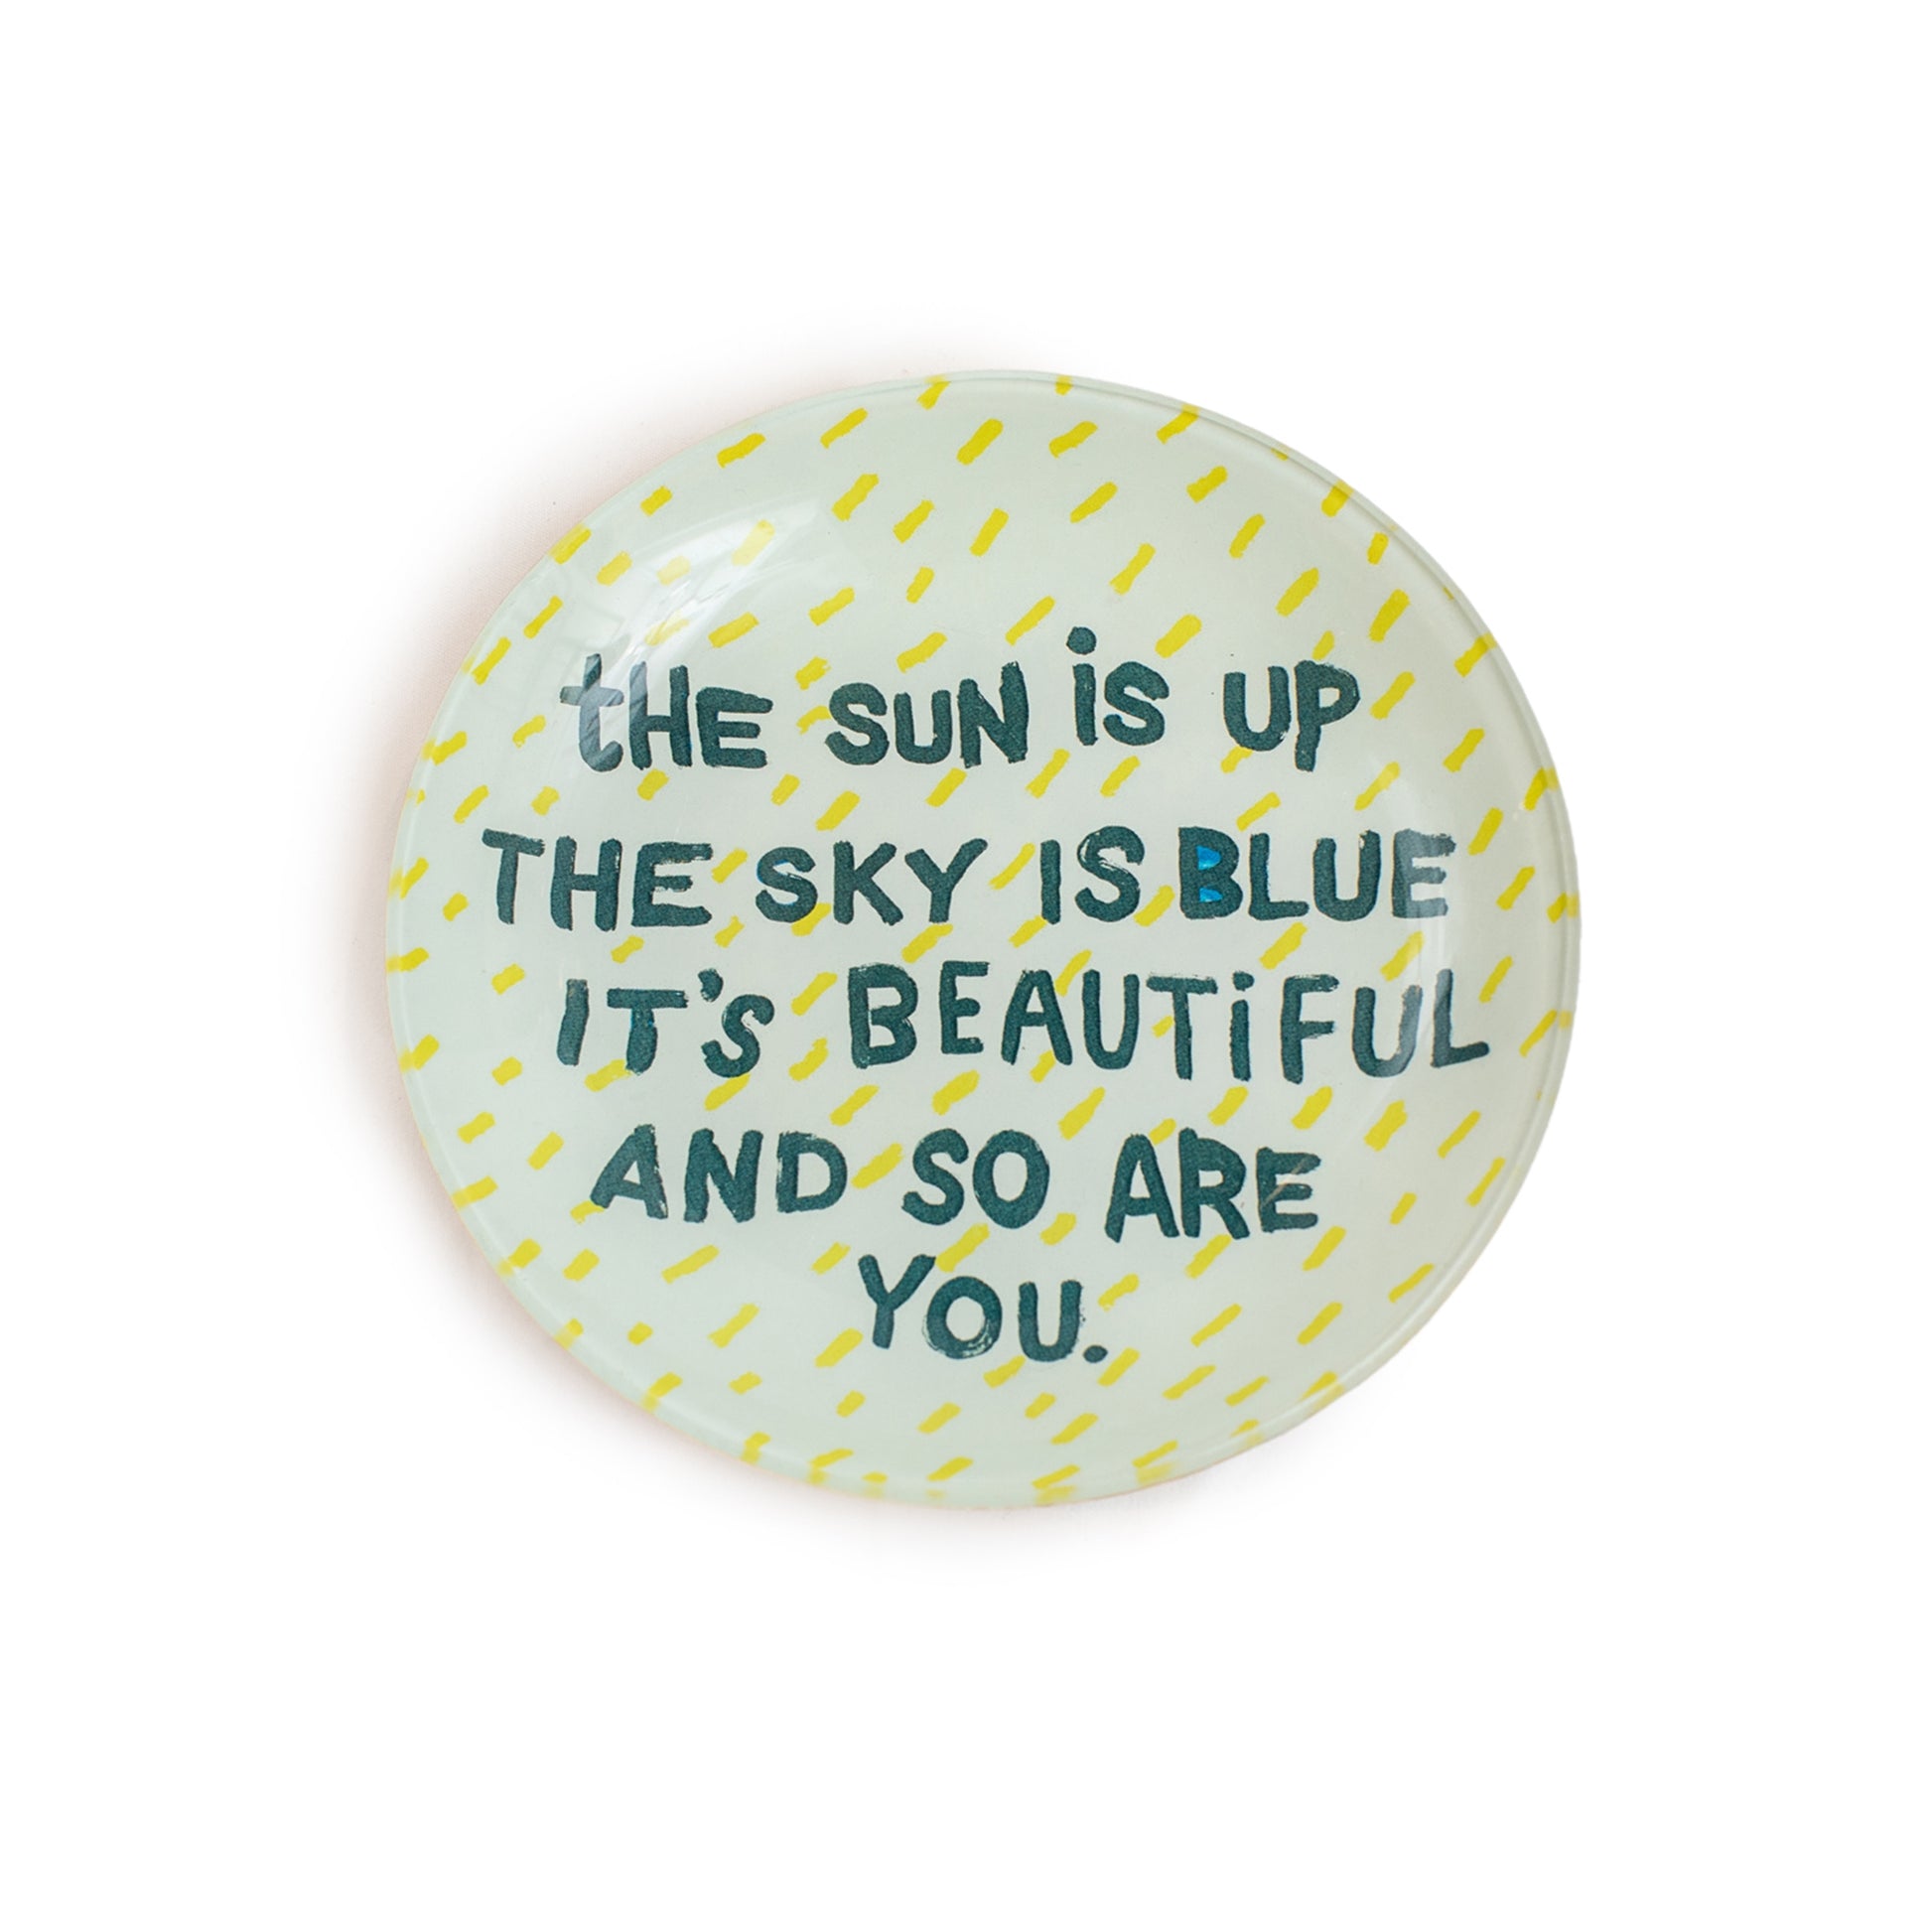 The Sun Is Up The Sky Is Blue It's Beautiful And So Are You - Round Decoupage Plate - 6-in - Mellow Monkey